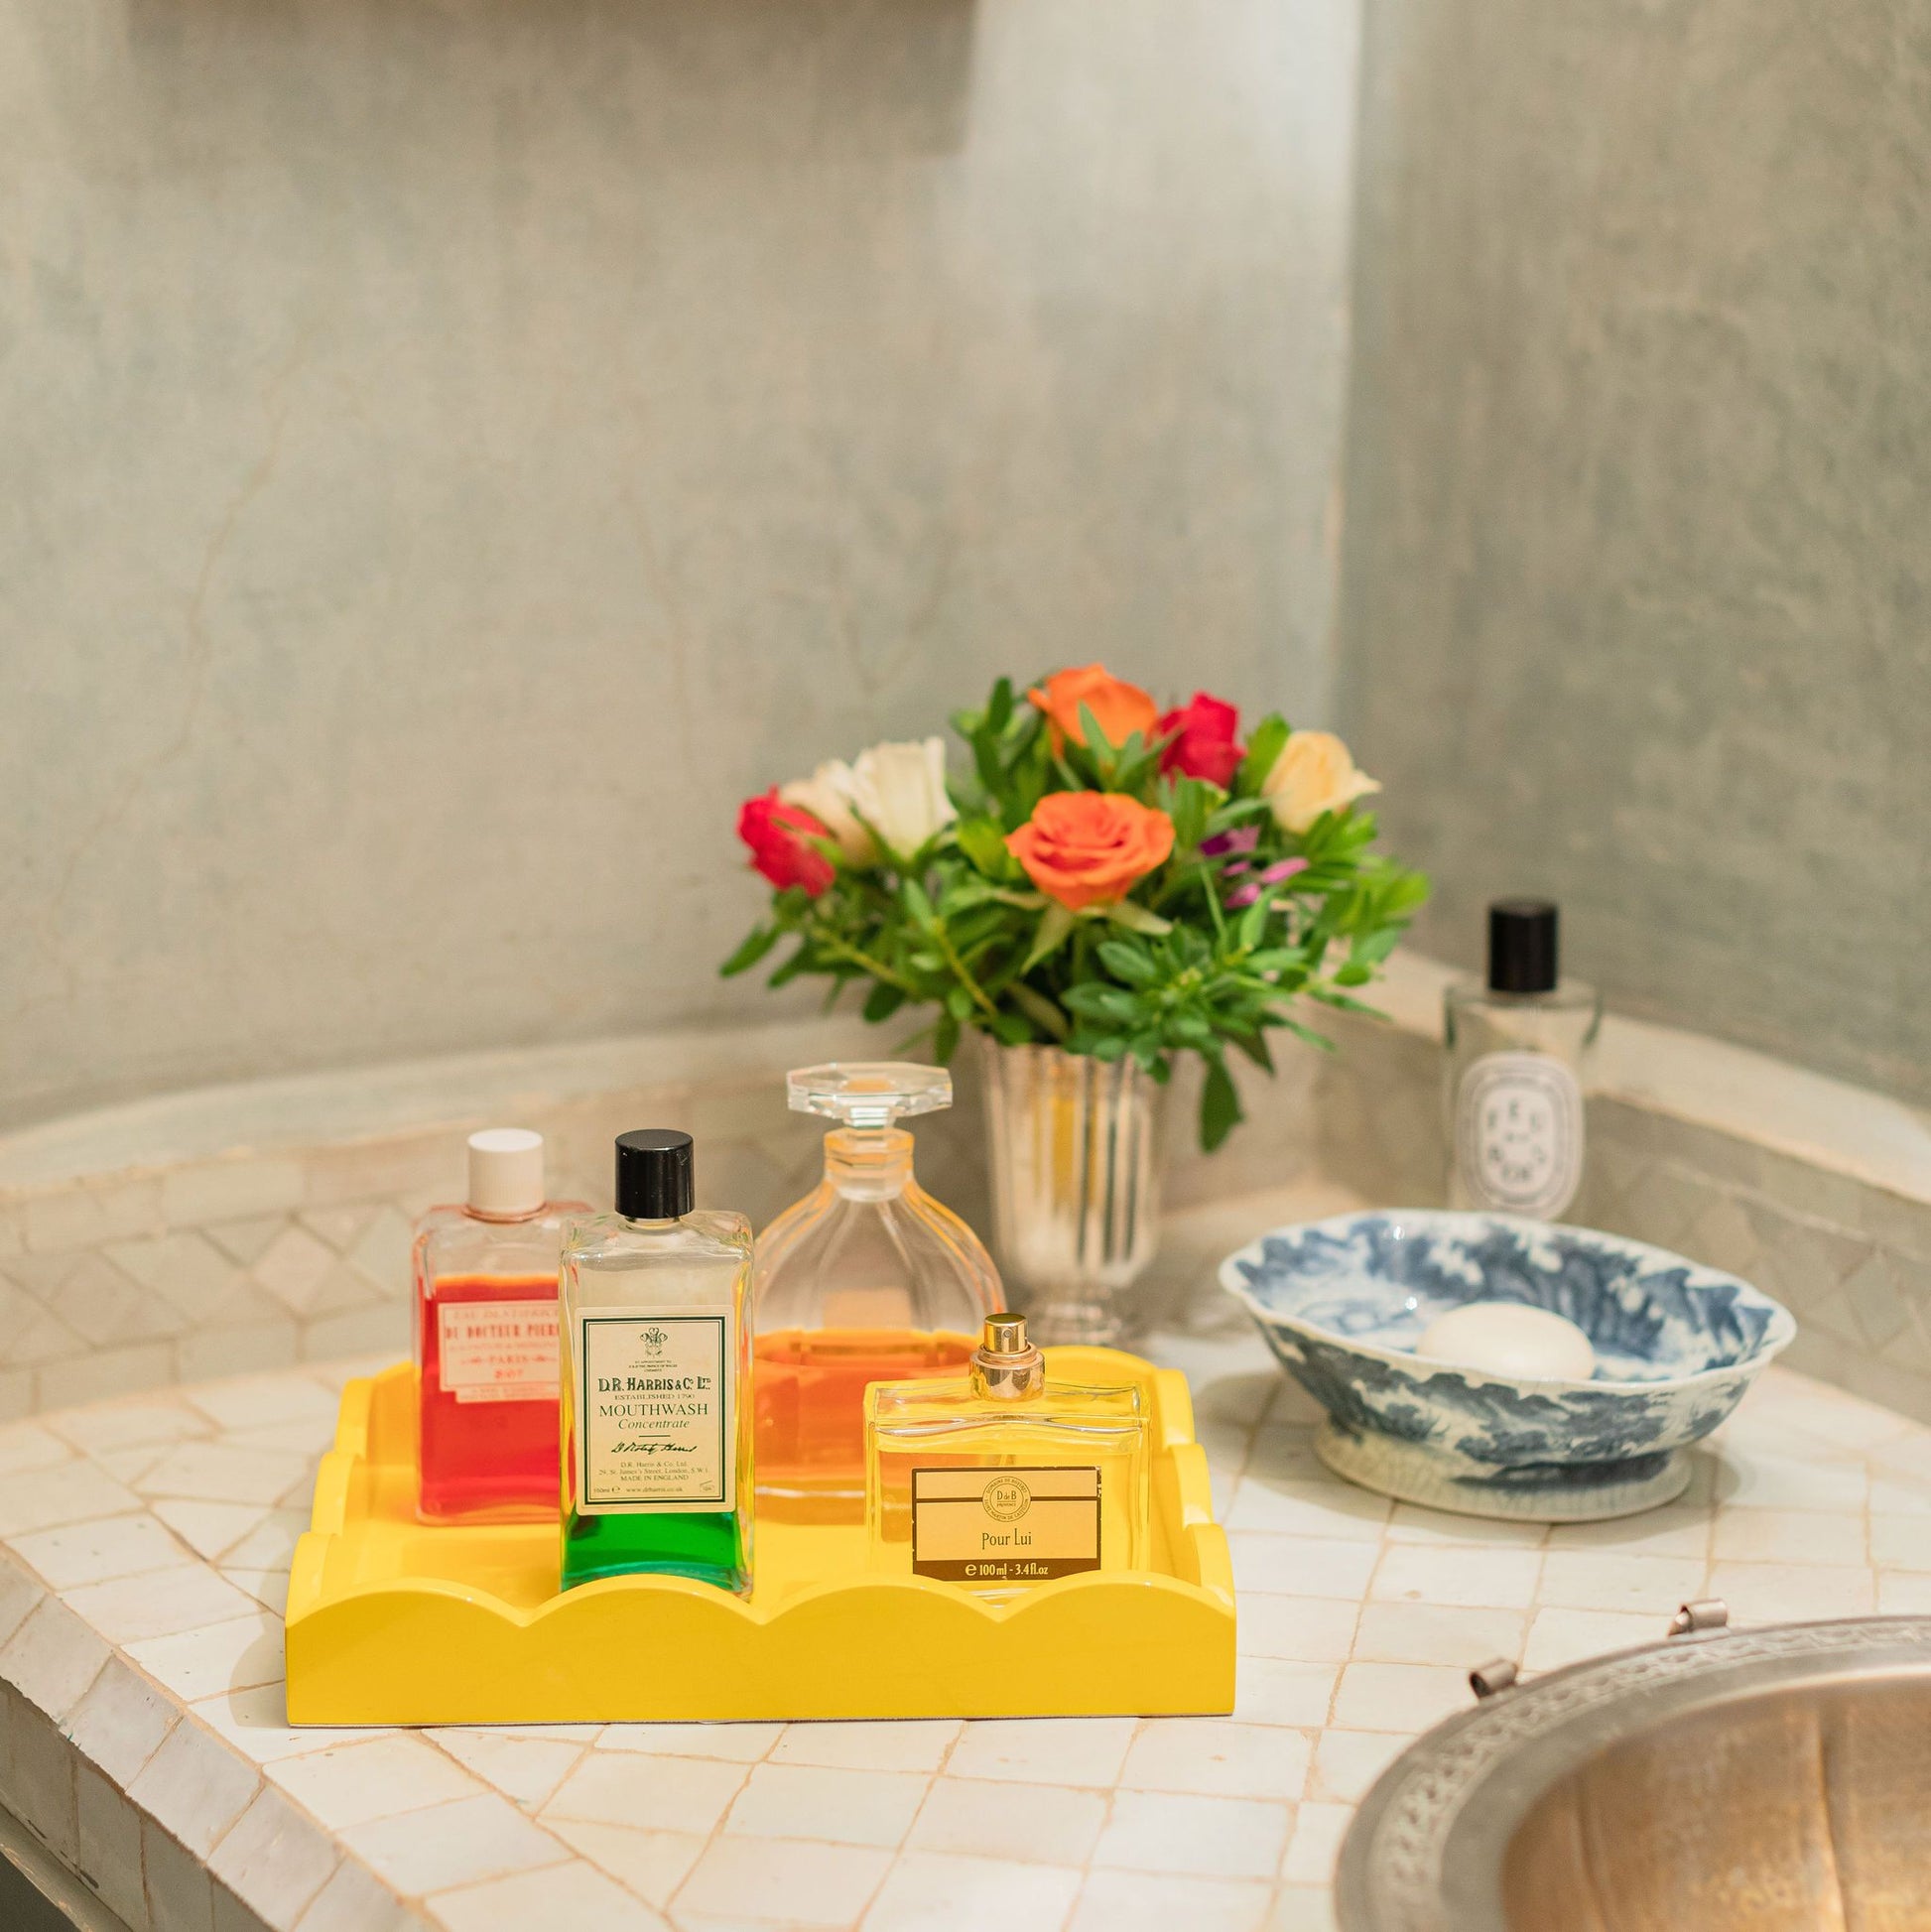 Perfume bottles on a small yellow lacquer tray with a scalloped edge